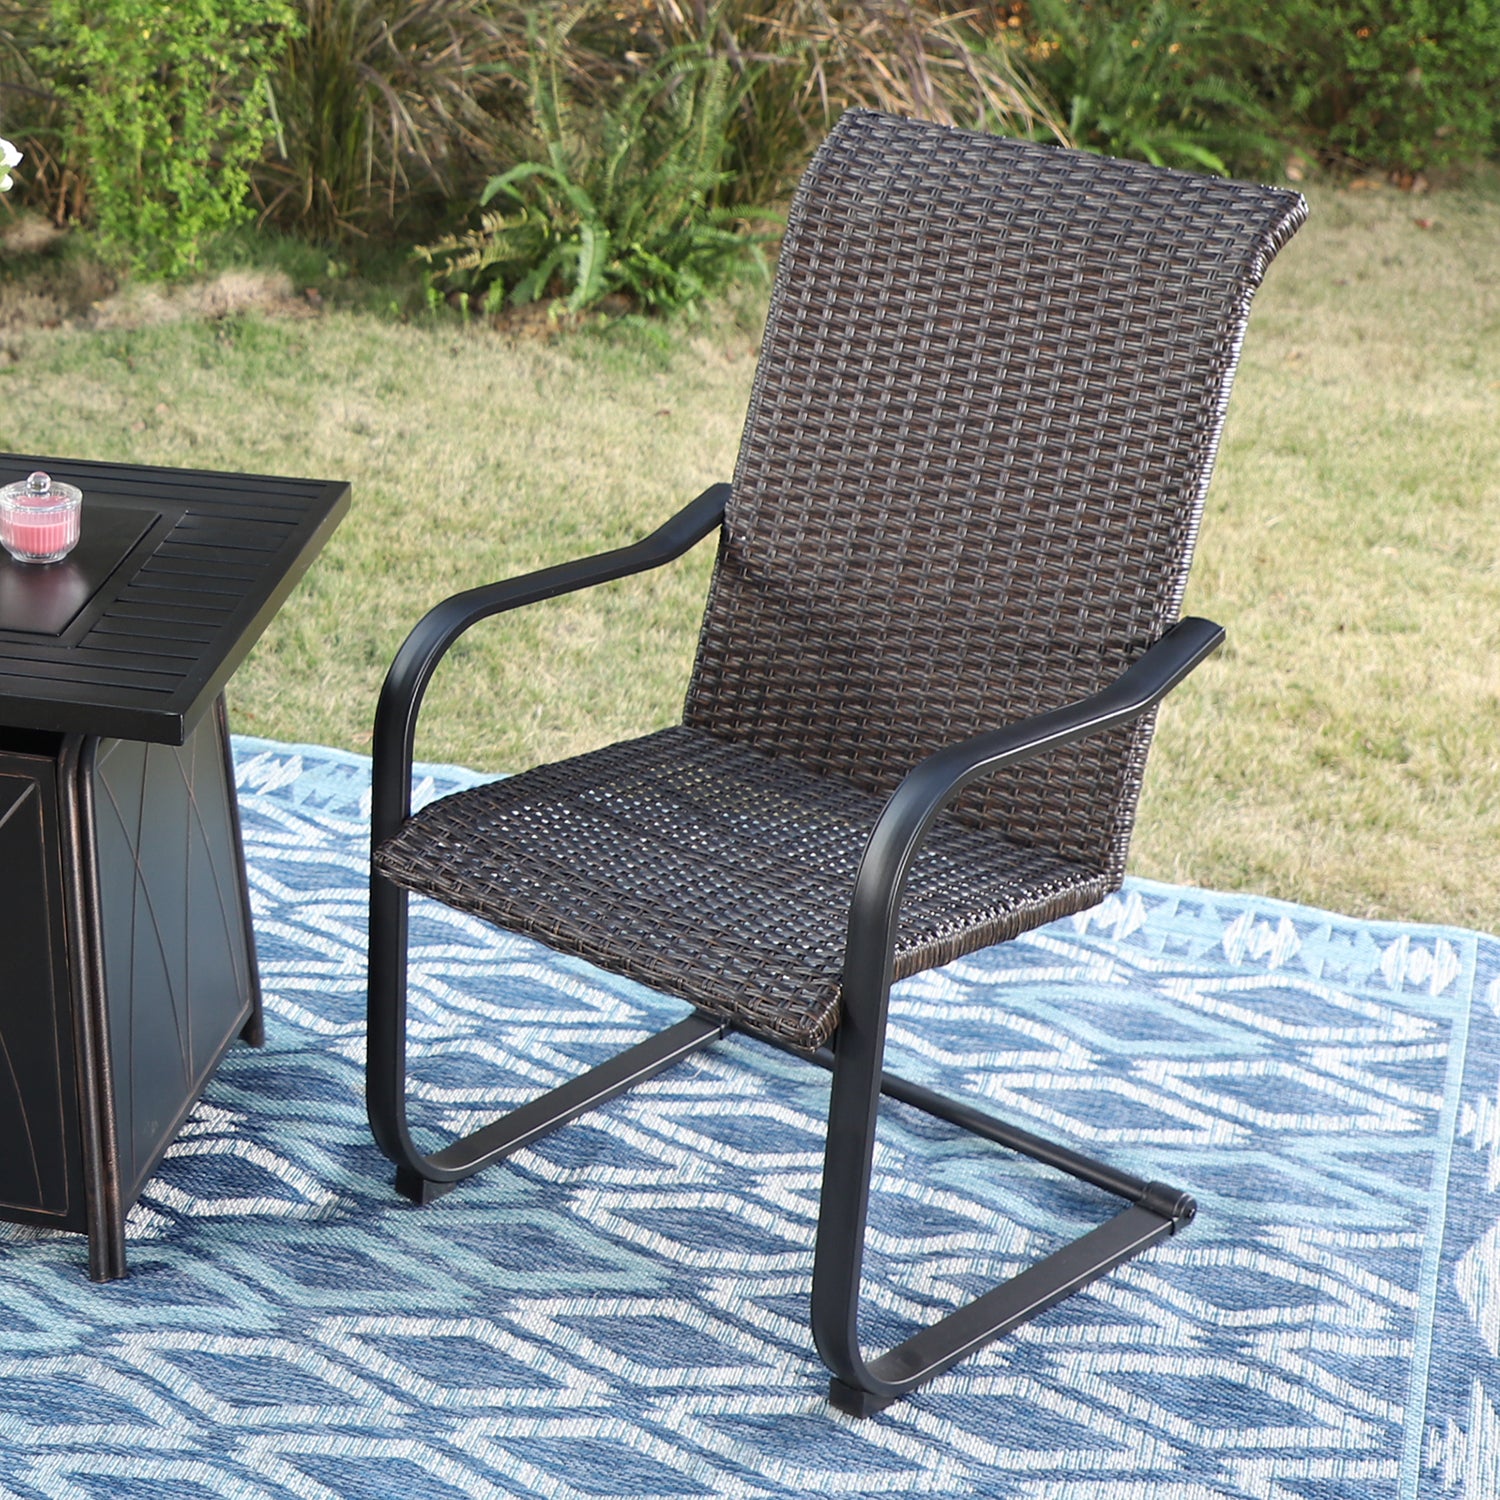 Sophia & William 3-Piece Rattan C-spring Dining Chairs & Small Round Table Patio Bistro Set